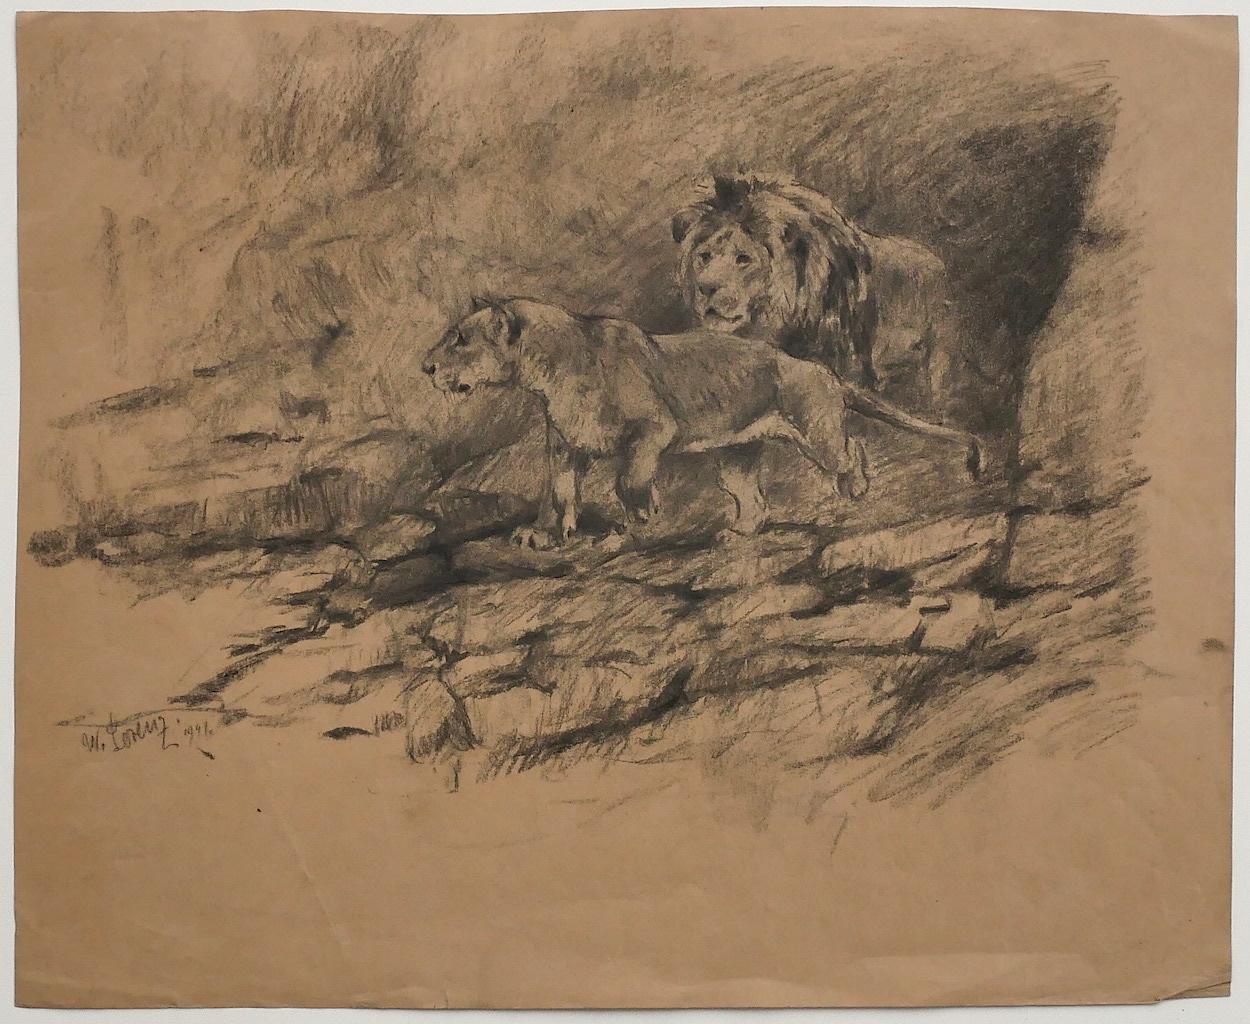 Lions is an original drawing in pencil Willy Lorenz in 1947.

Hand-signed on the lower left and dated.

The State of preservation is very good except for some foldings.

Sheet dimension:34 x 41.5 cm

The artwork represents a scenery of two lions